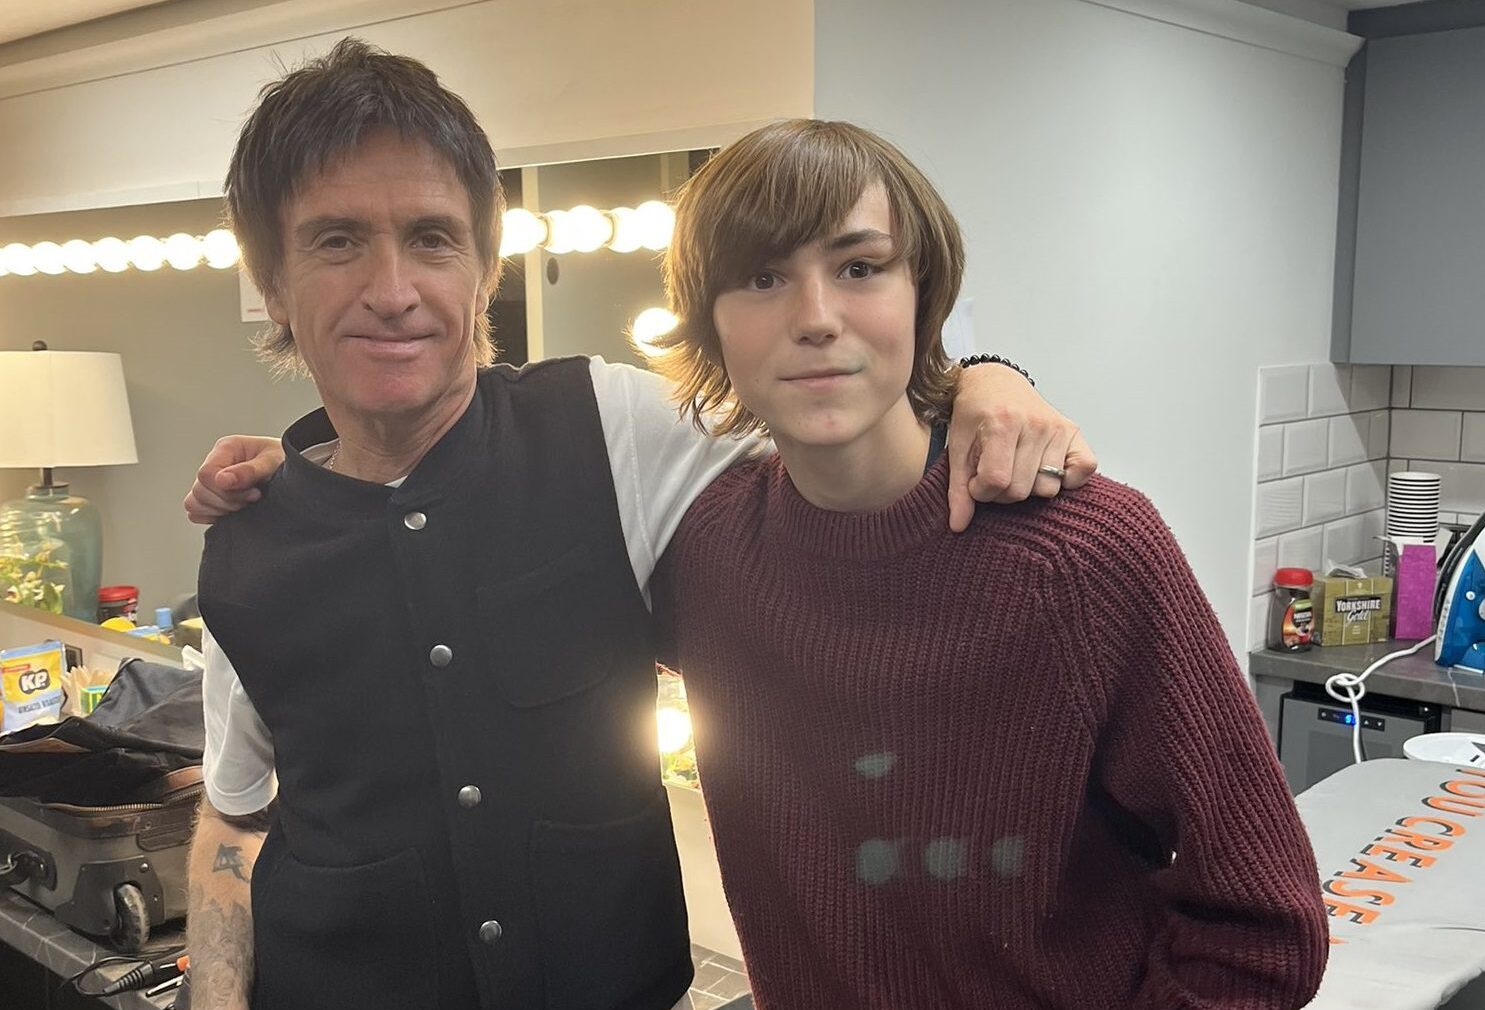 Johnny Marr stood with John Denton in a back stage room